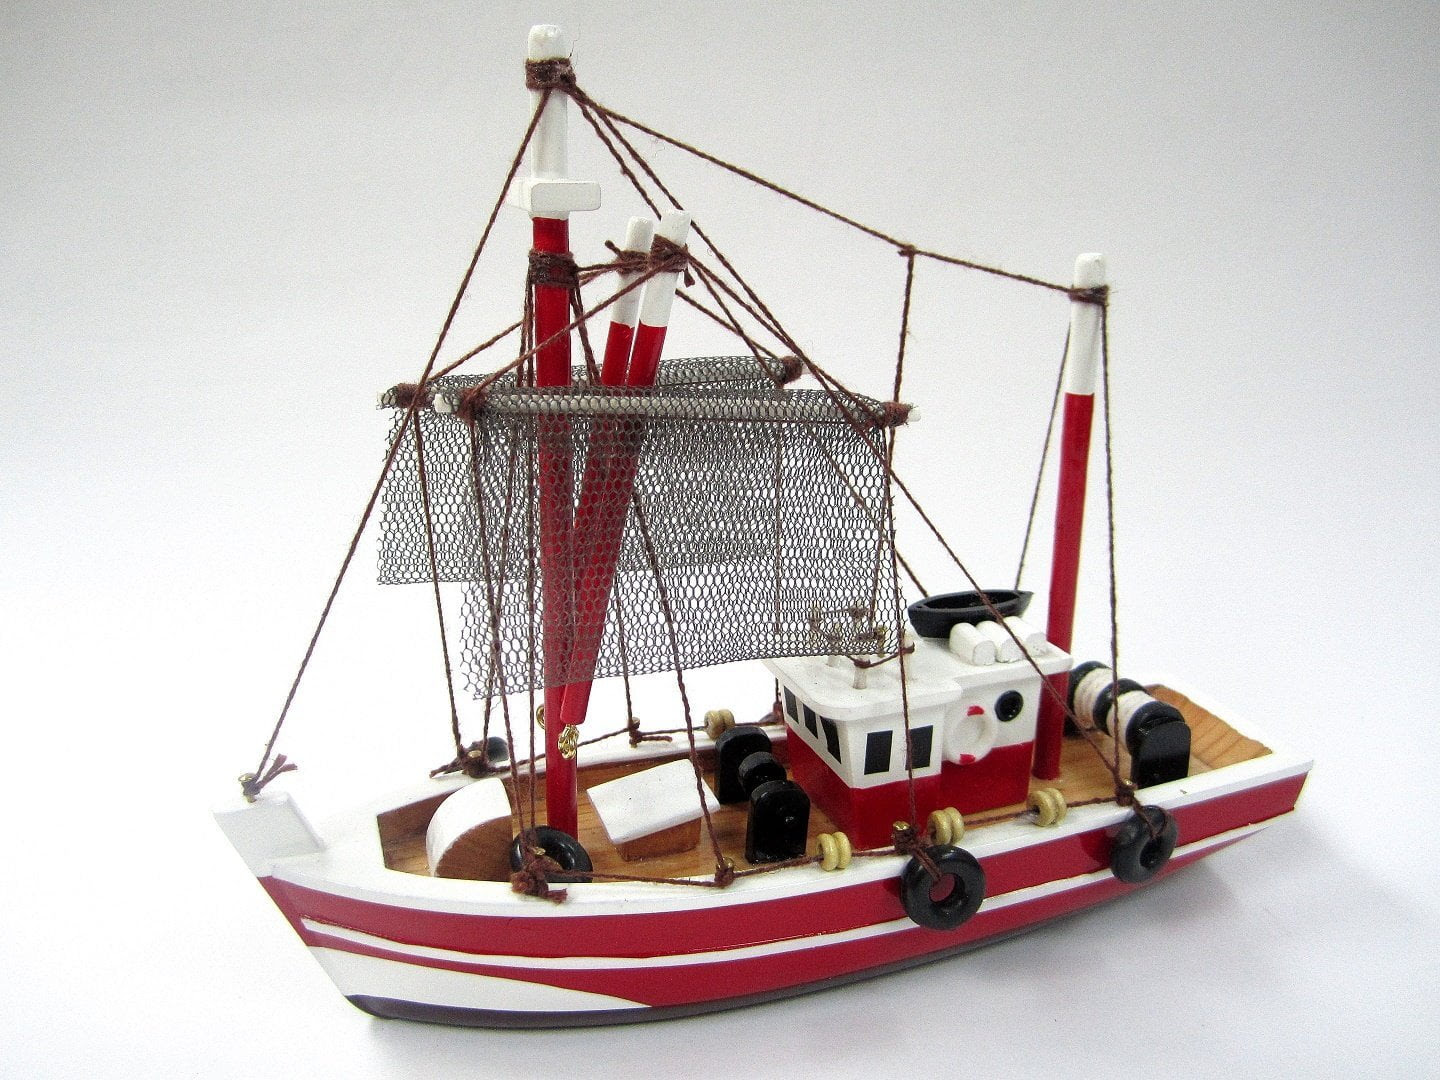 Fishing Magician Starter Boat Kit: Build Your Own Wooden Model Ship ...